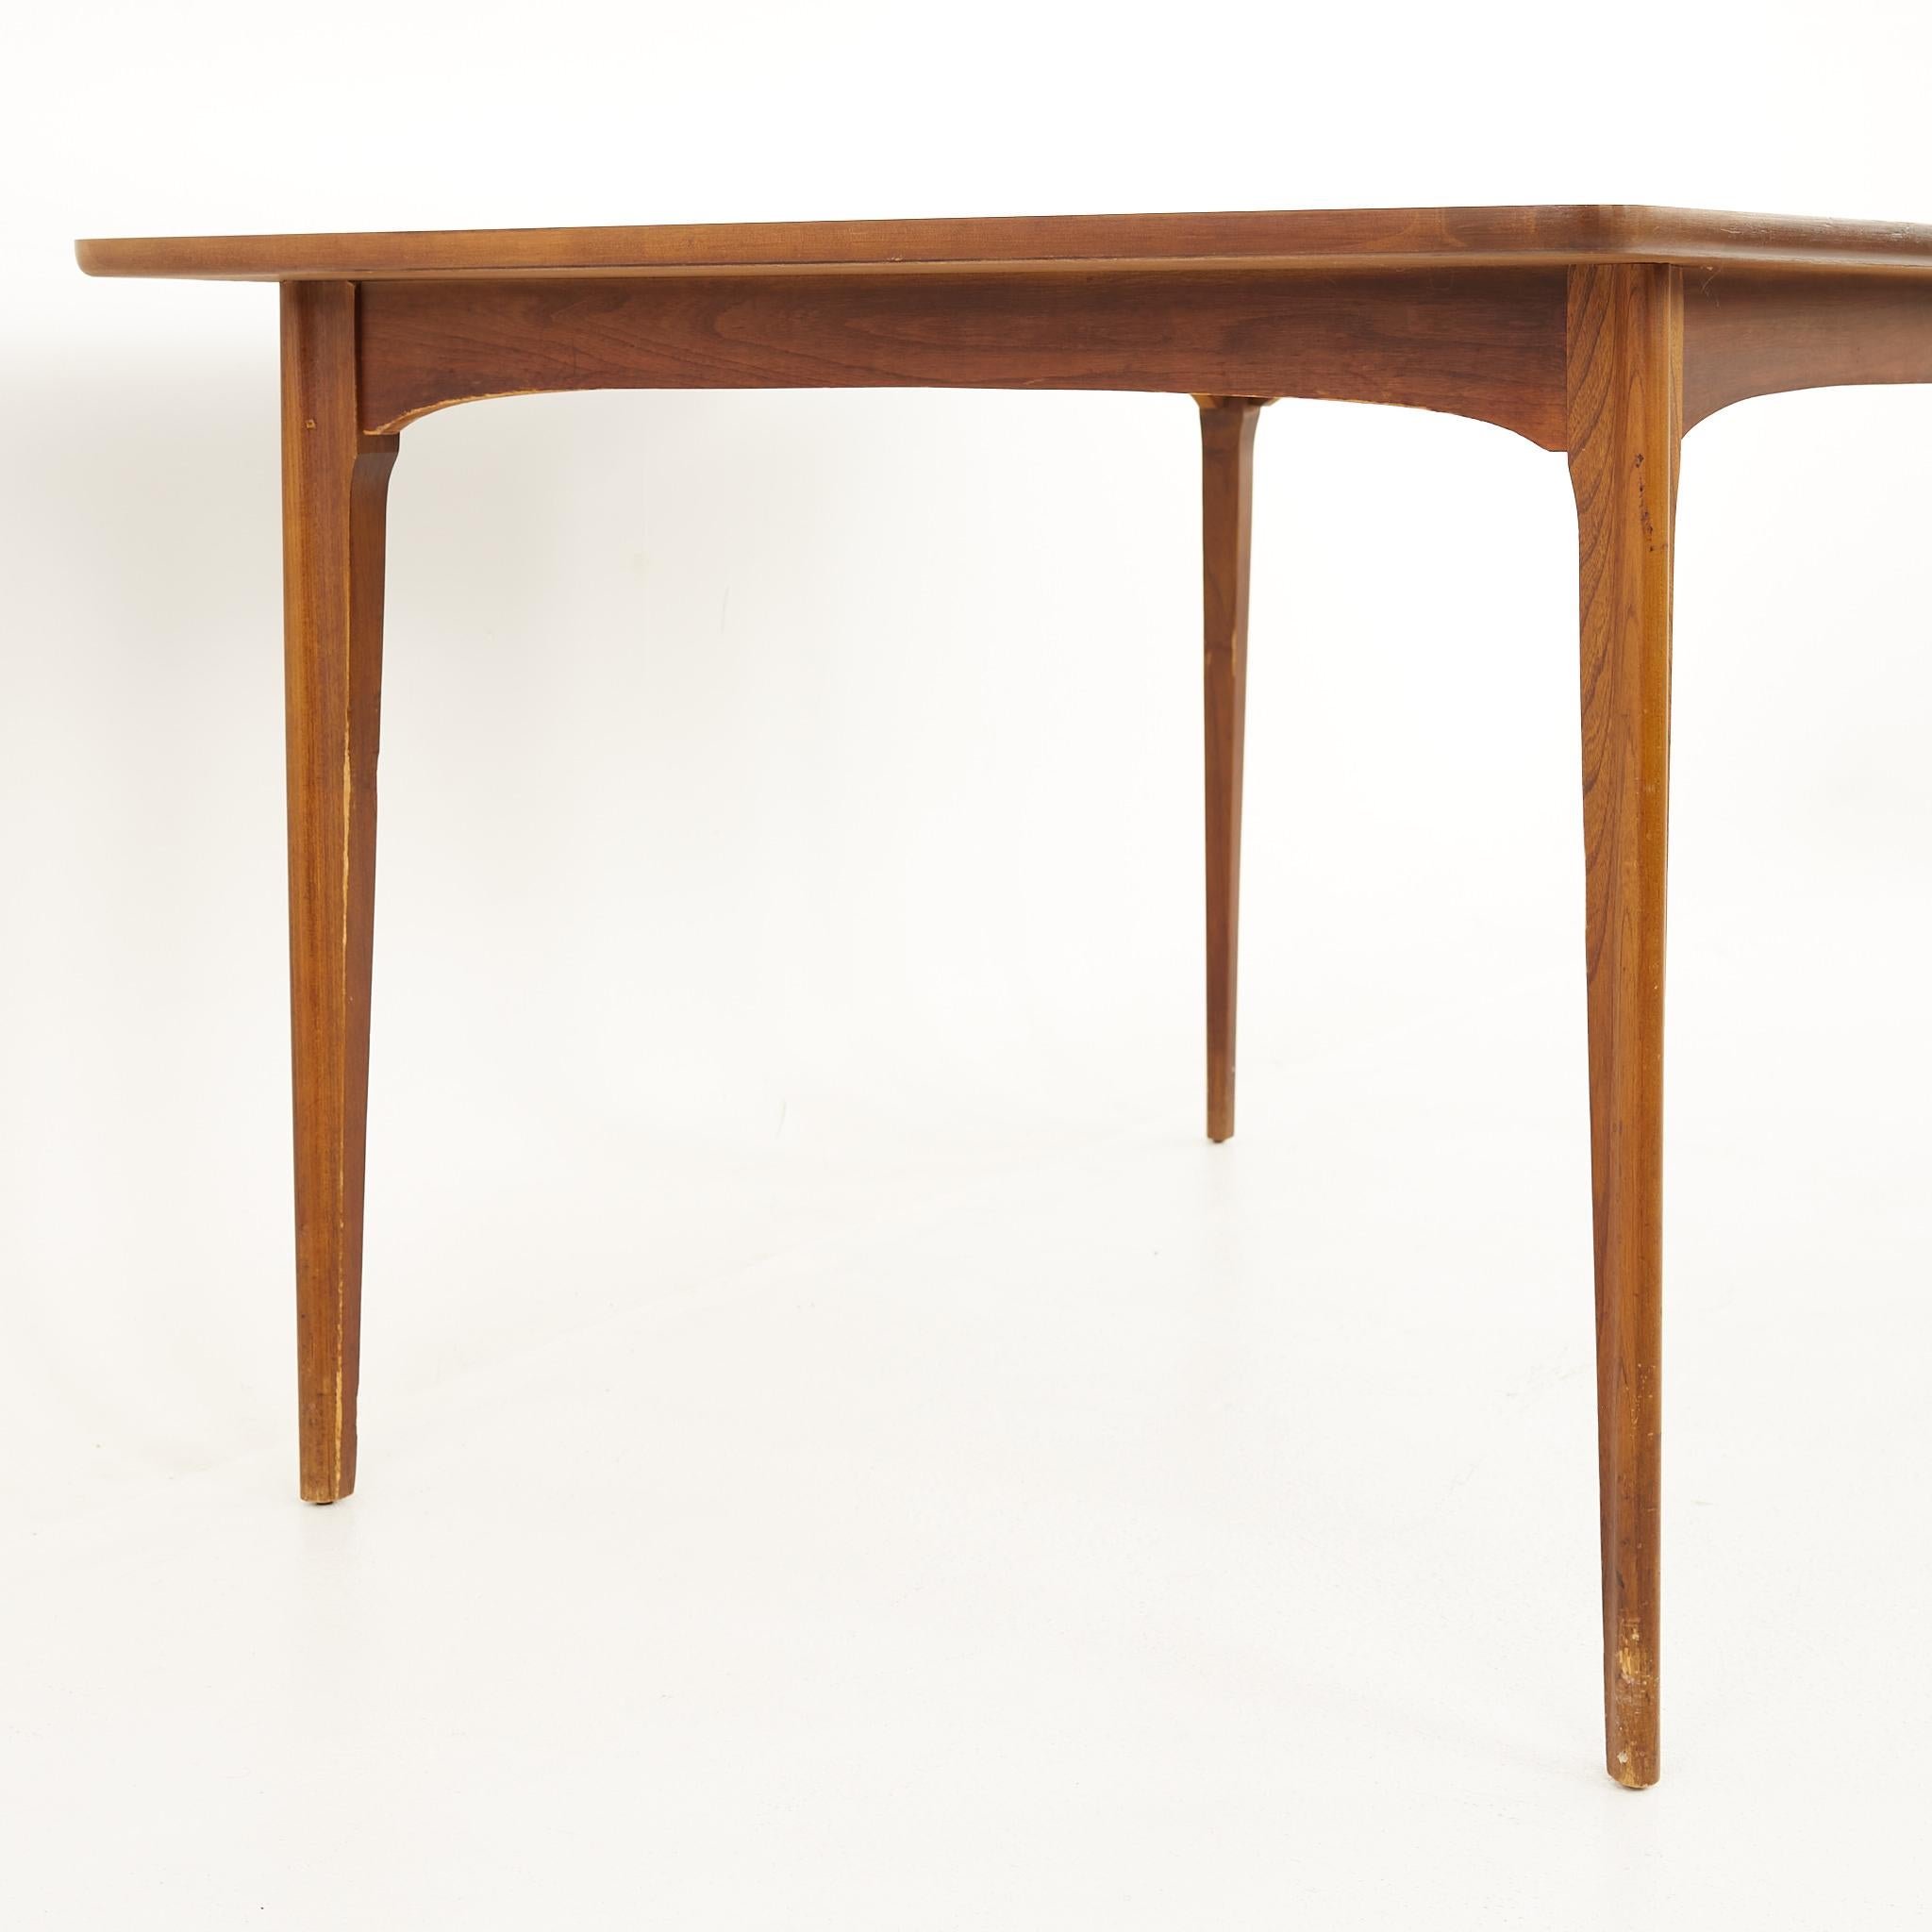 Kent Coffey Perspecta Mid Century Walnut Surfboard Dining Table In Good Condition For Sale In Countryside, IL